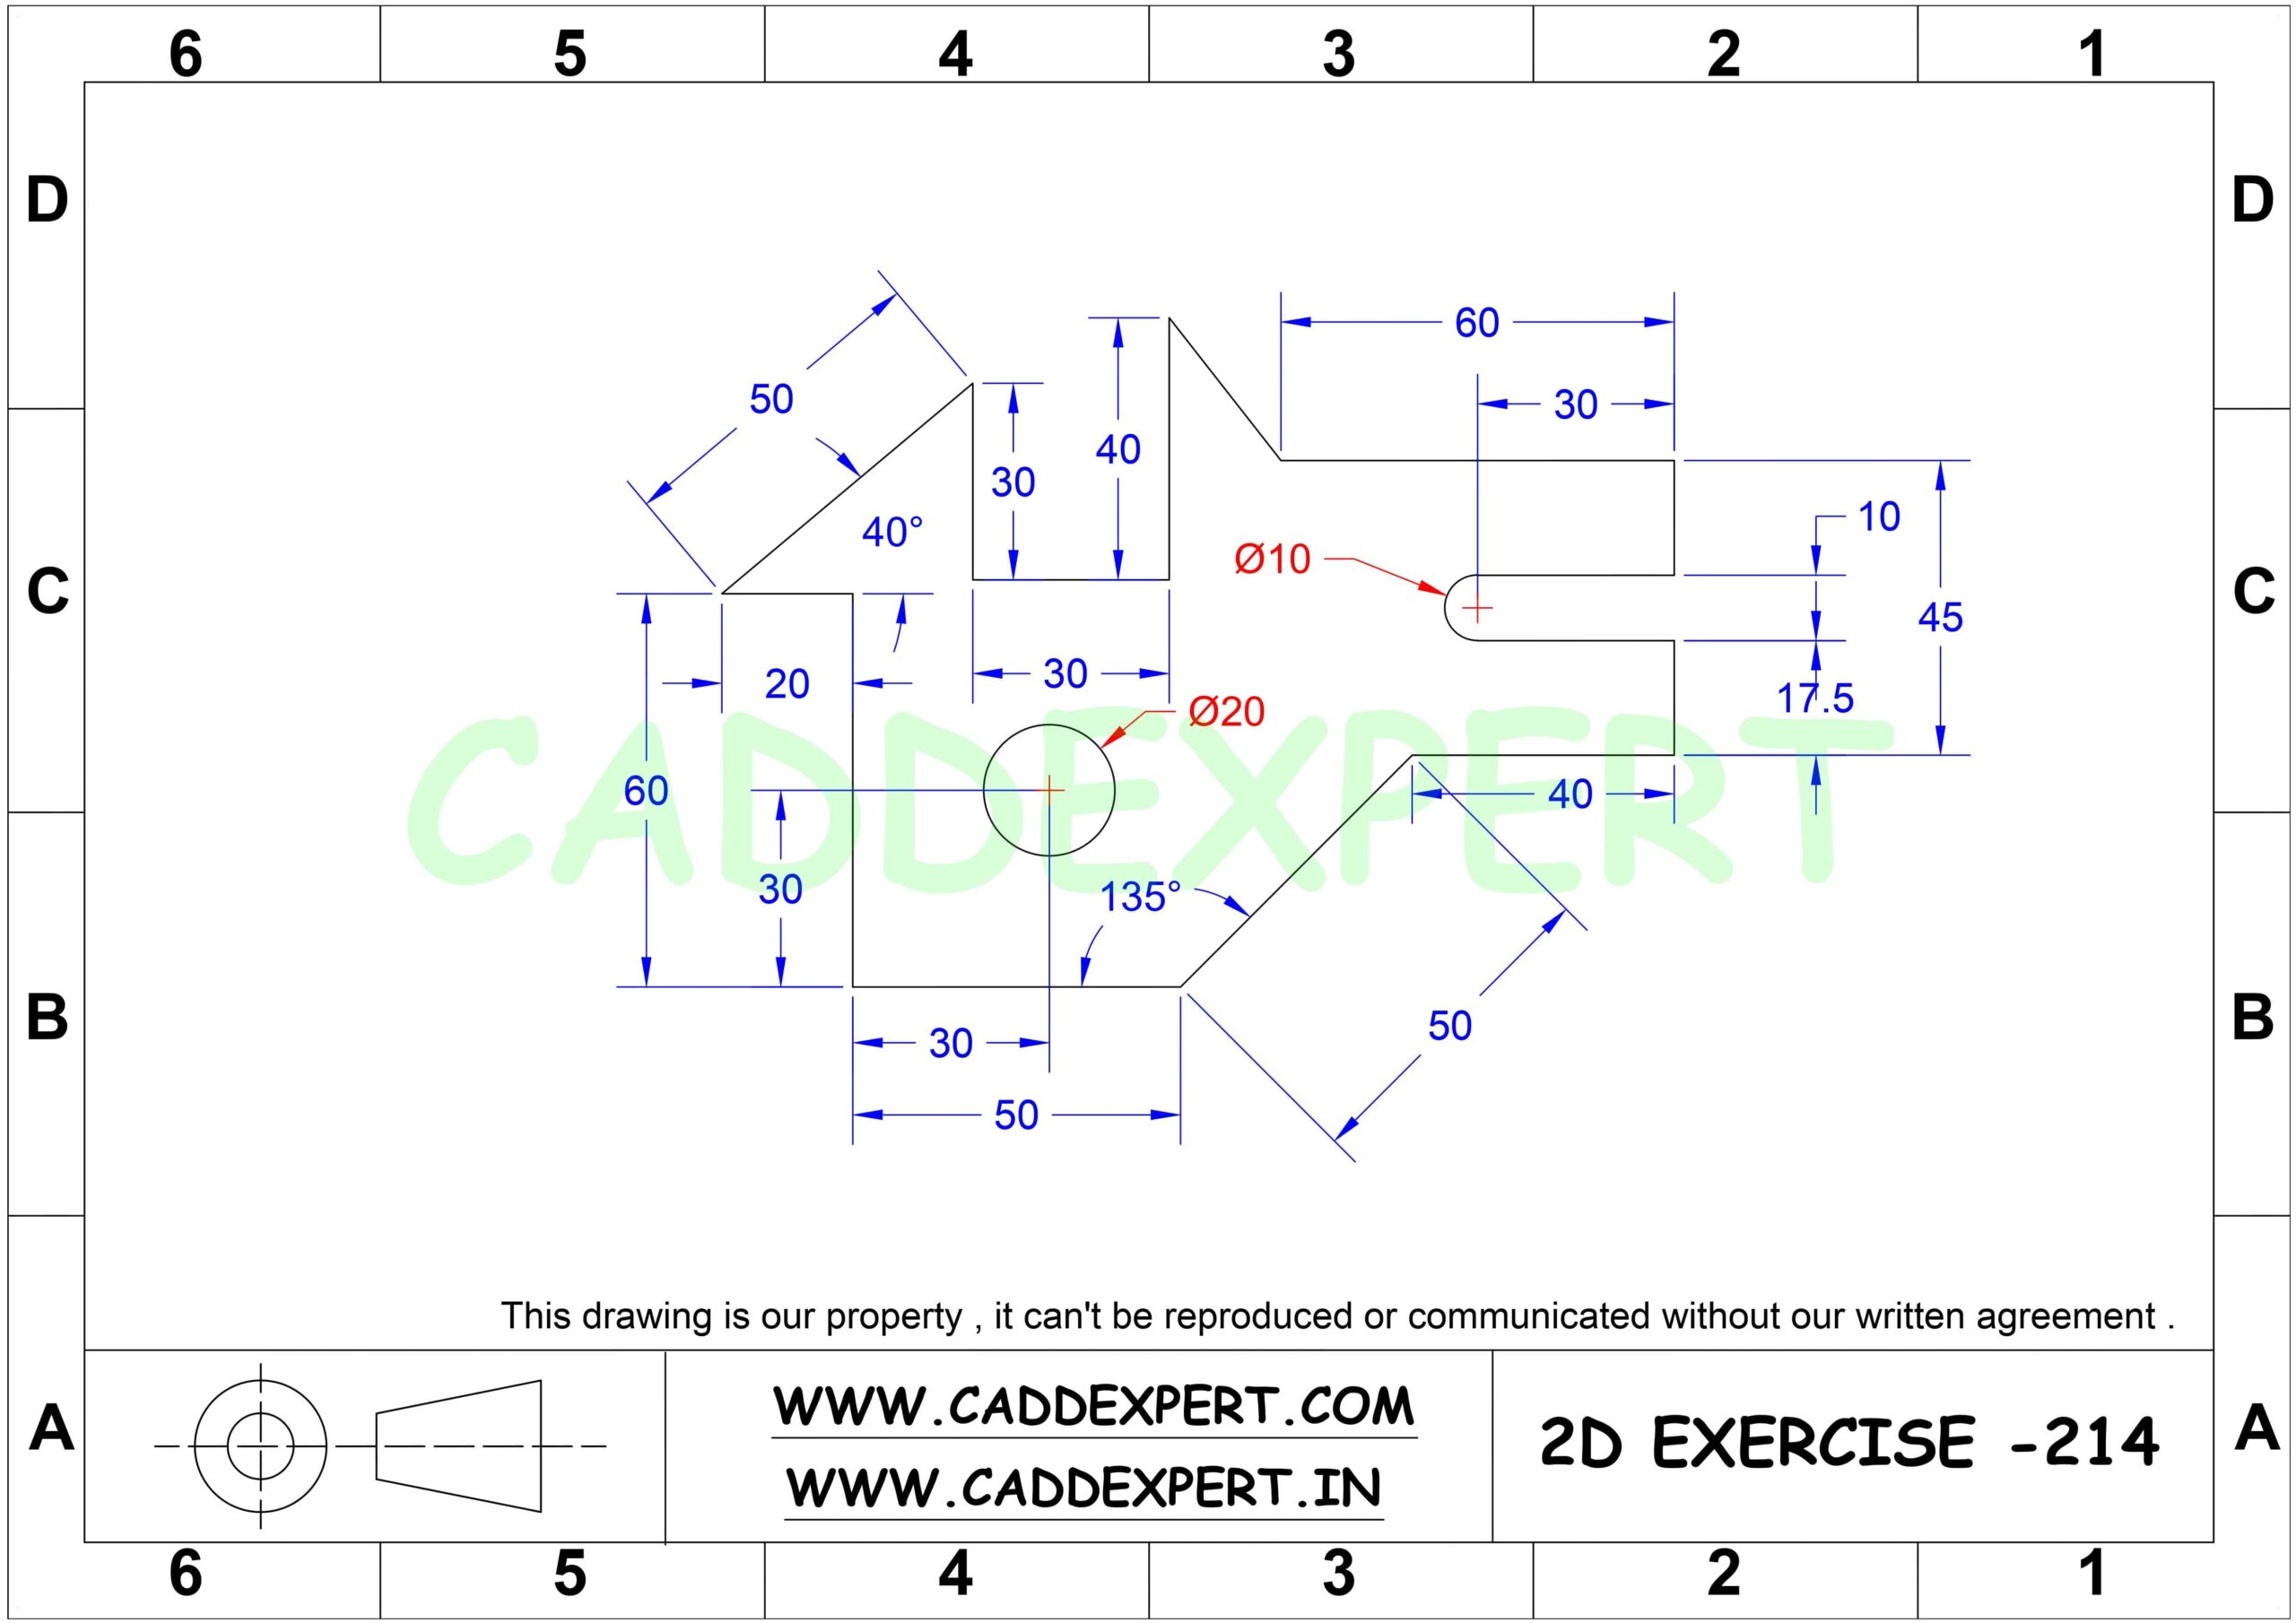 50 AUTOCAD PRACTICE DRAWING - 14